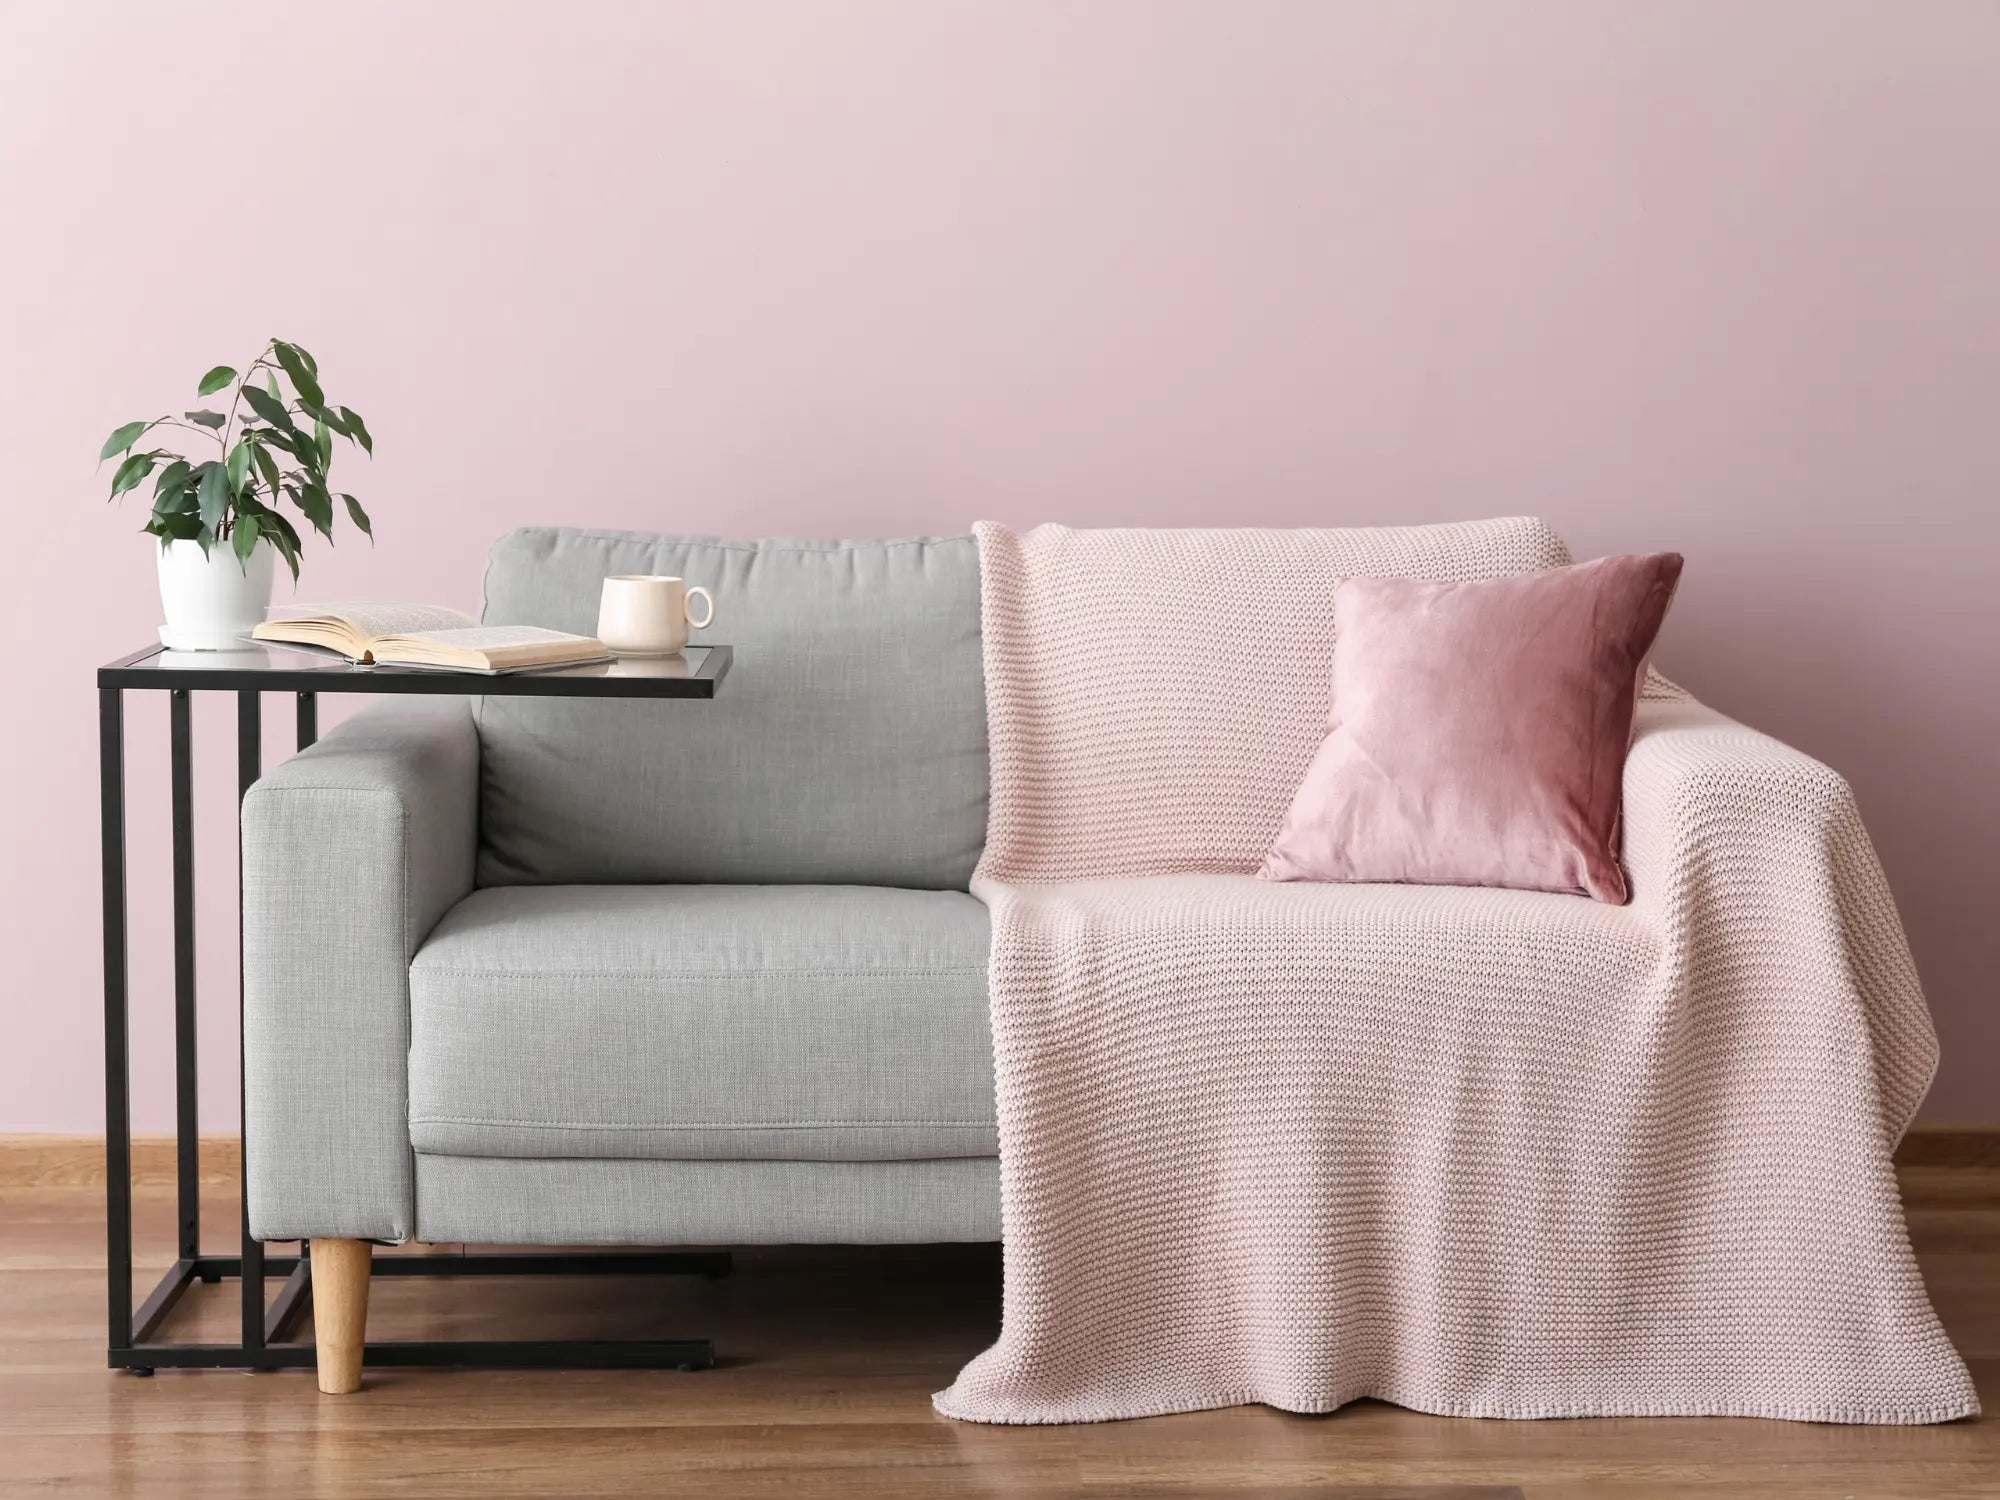 Pink and Grey Living Room Interior Styling Ideas